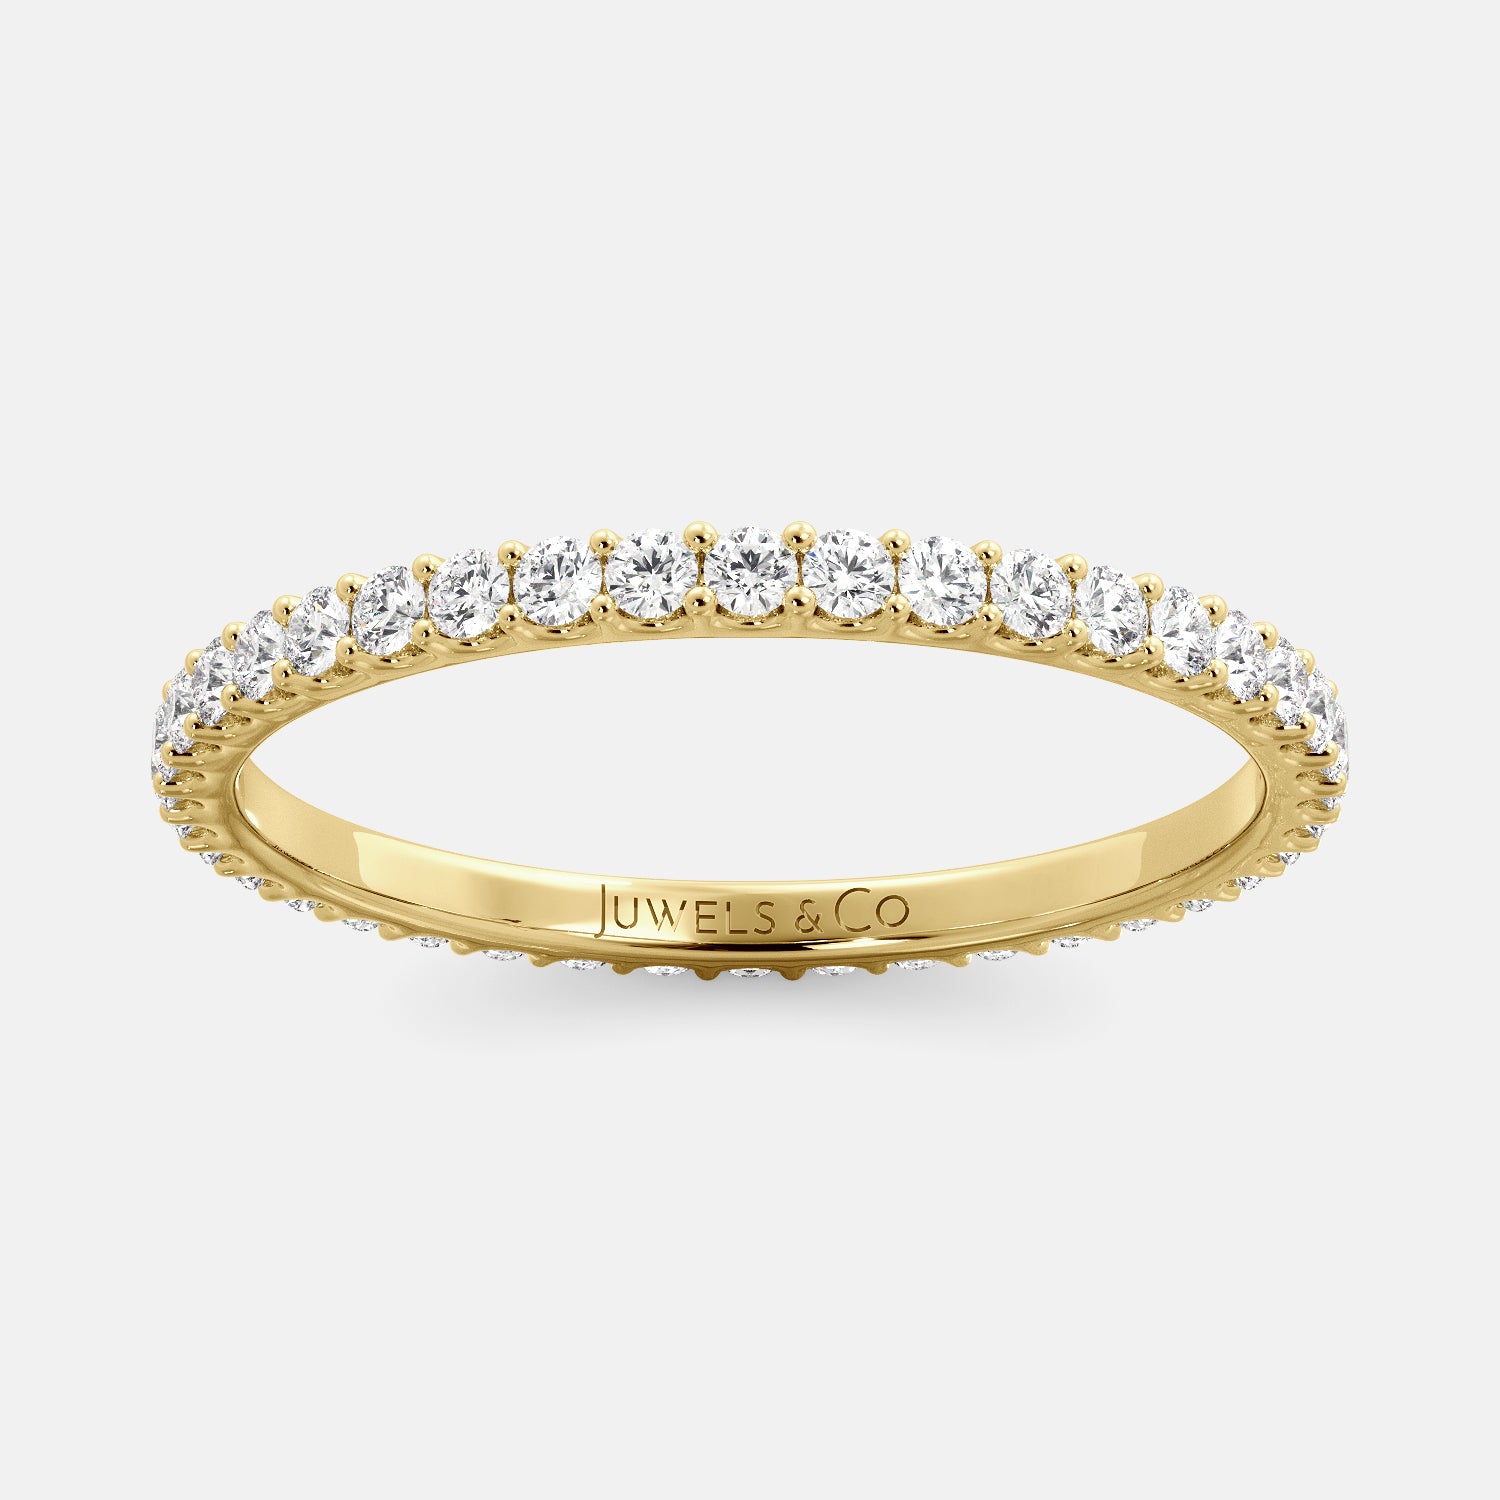 A close-up of a yellow gold eternity wedding band with a row of round diamonds. The band is a classic and timeless design that is perfect for any occasion. The diamonds sparkle and shine, adding a touch of glamour. The band is made of 14K yellow gold and features lab-grown diamonds that are conflict-free.